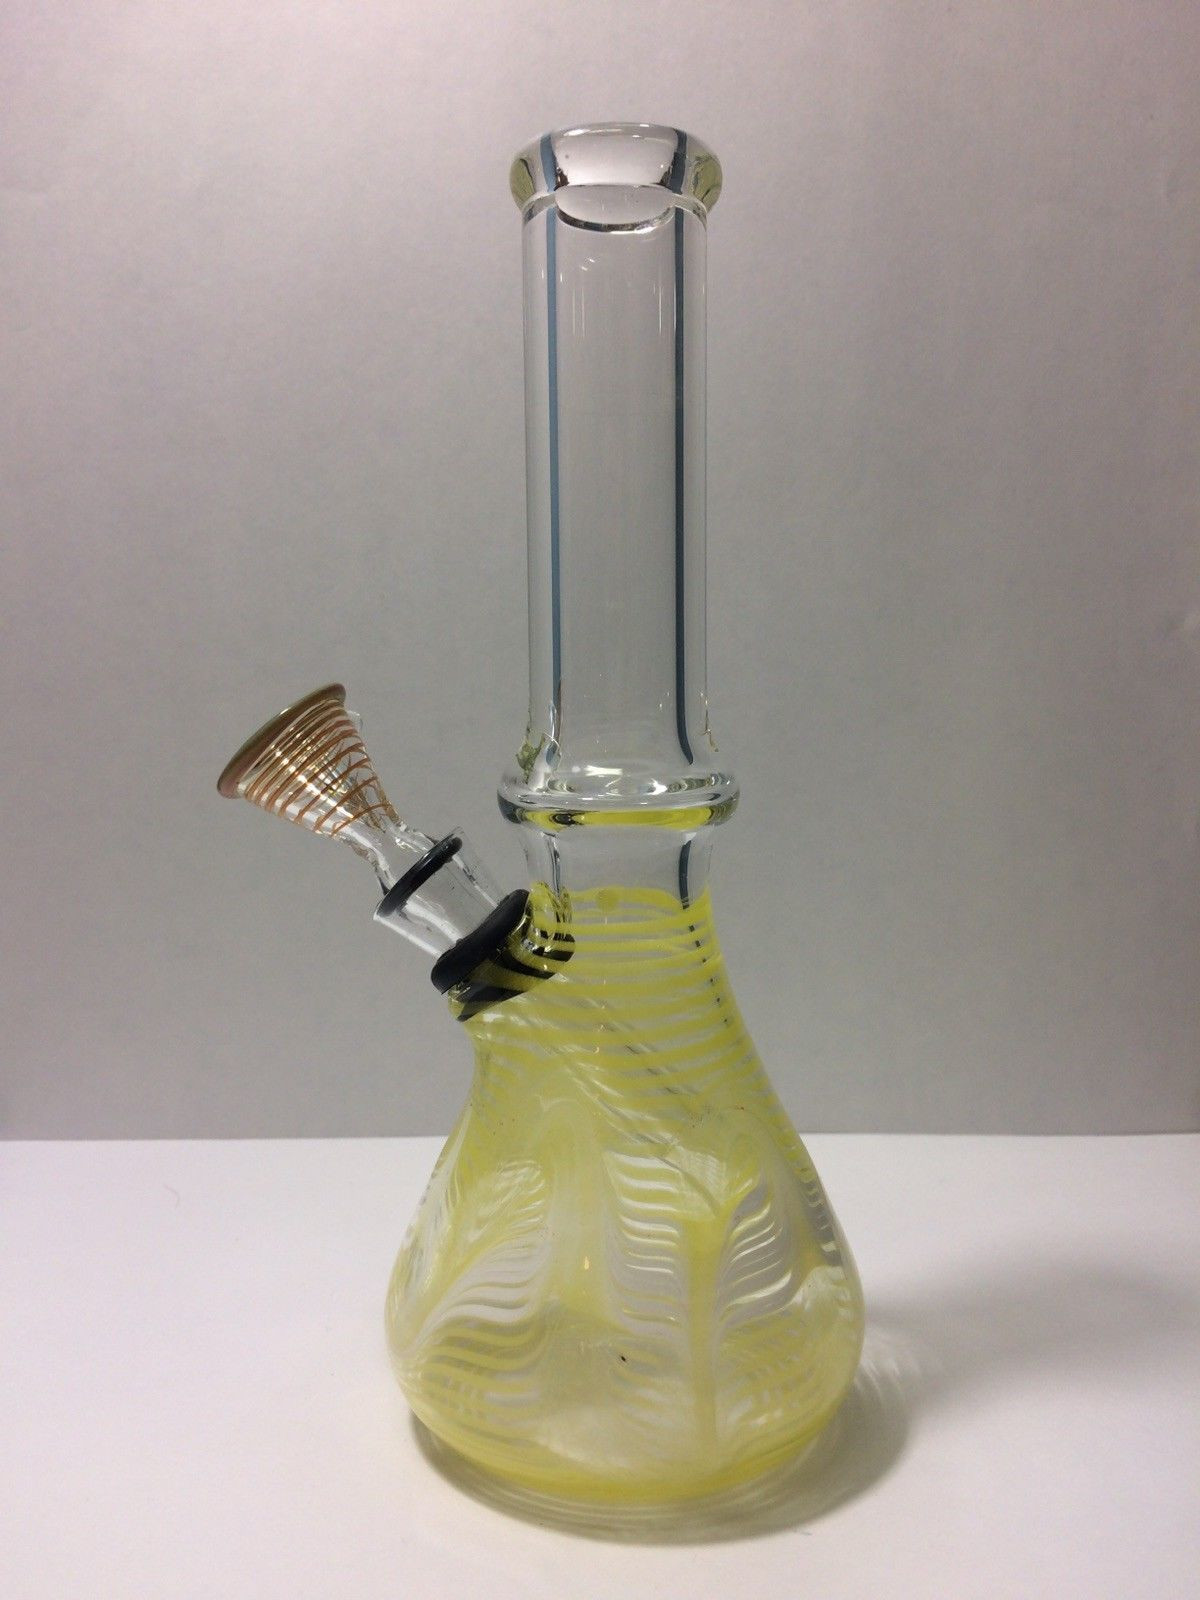 beaker glass tube vase of us 25 00 7 inch tall beaker bong made in usa fast discreet in us 25 00 7 inch tall beaker bong made in usa fast discreet shipping leave a message note with your color of choice when you purchase or a blue one will